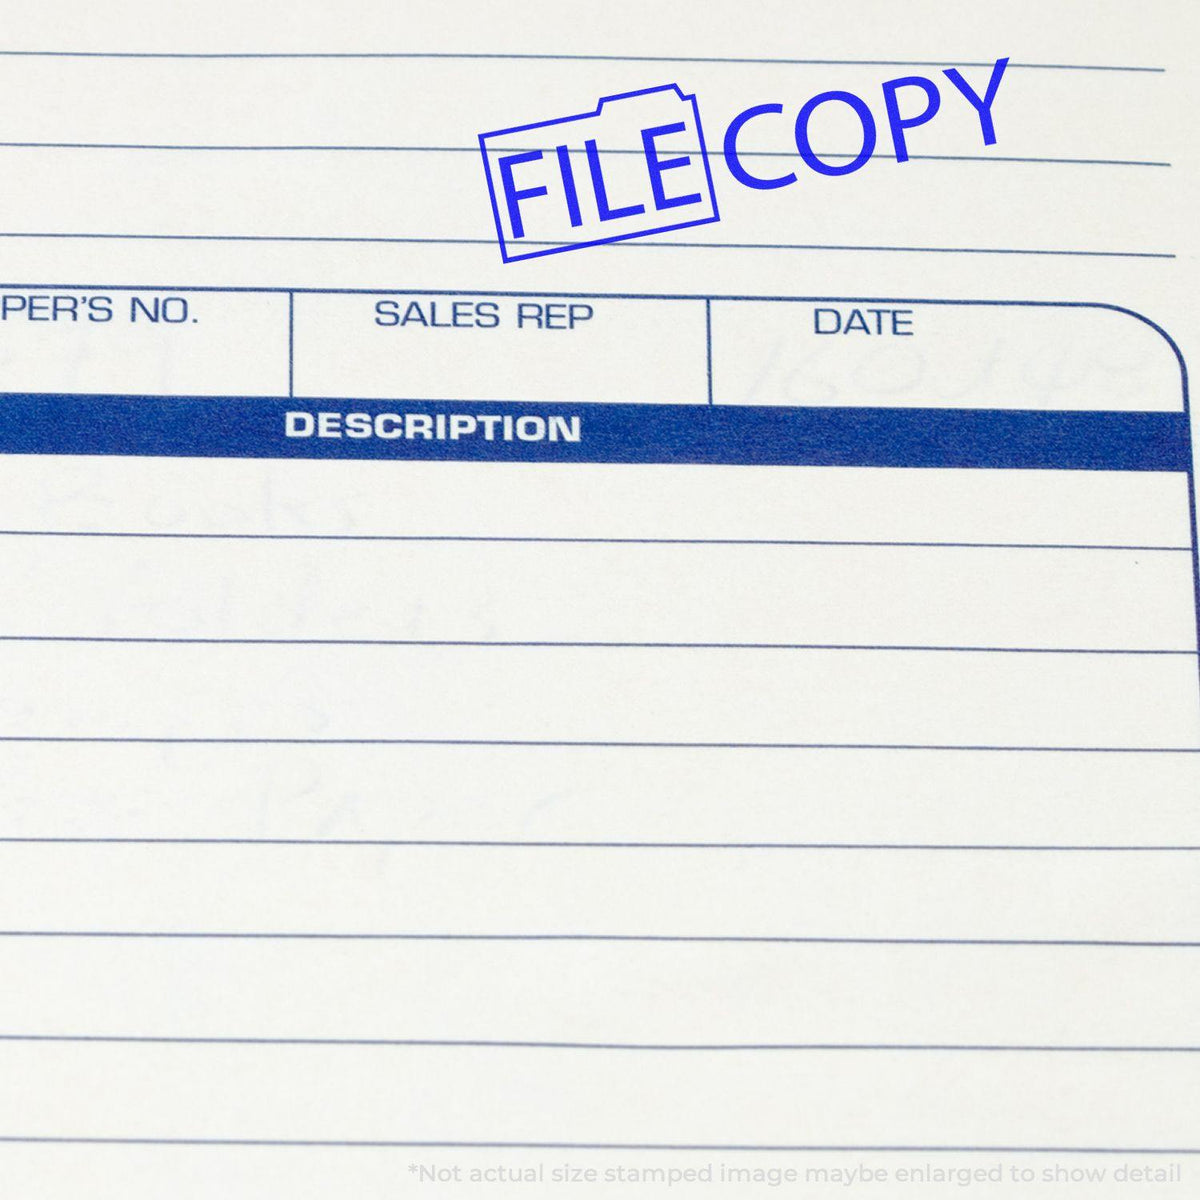 Large Pre-Inked File Copy with Folder Stamp In Use Photo